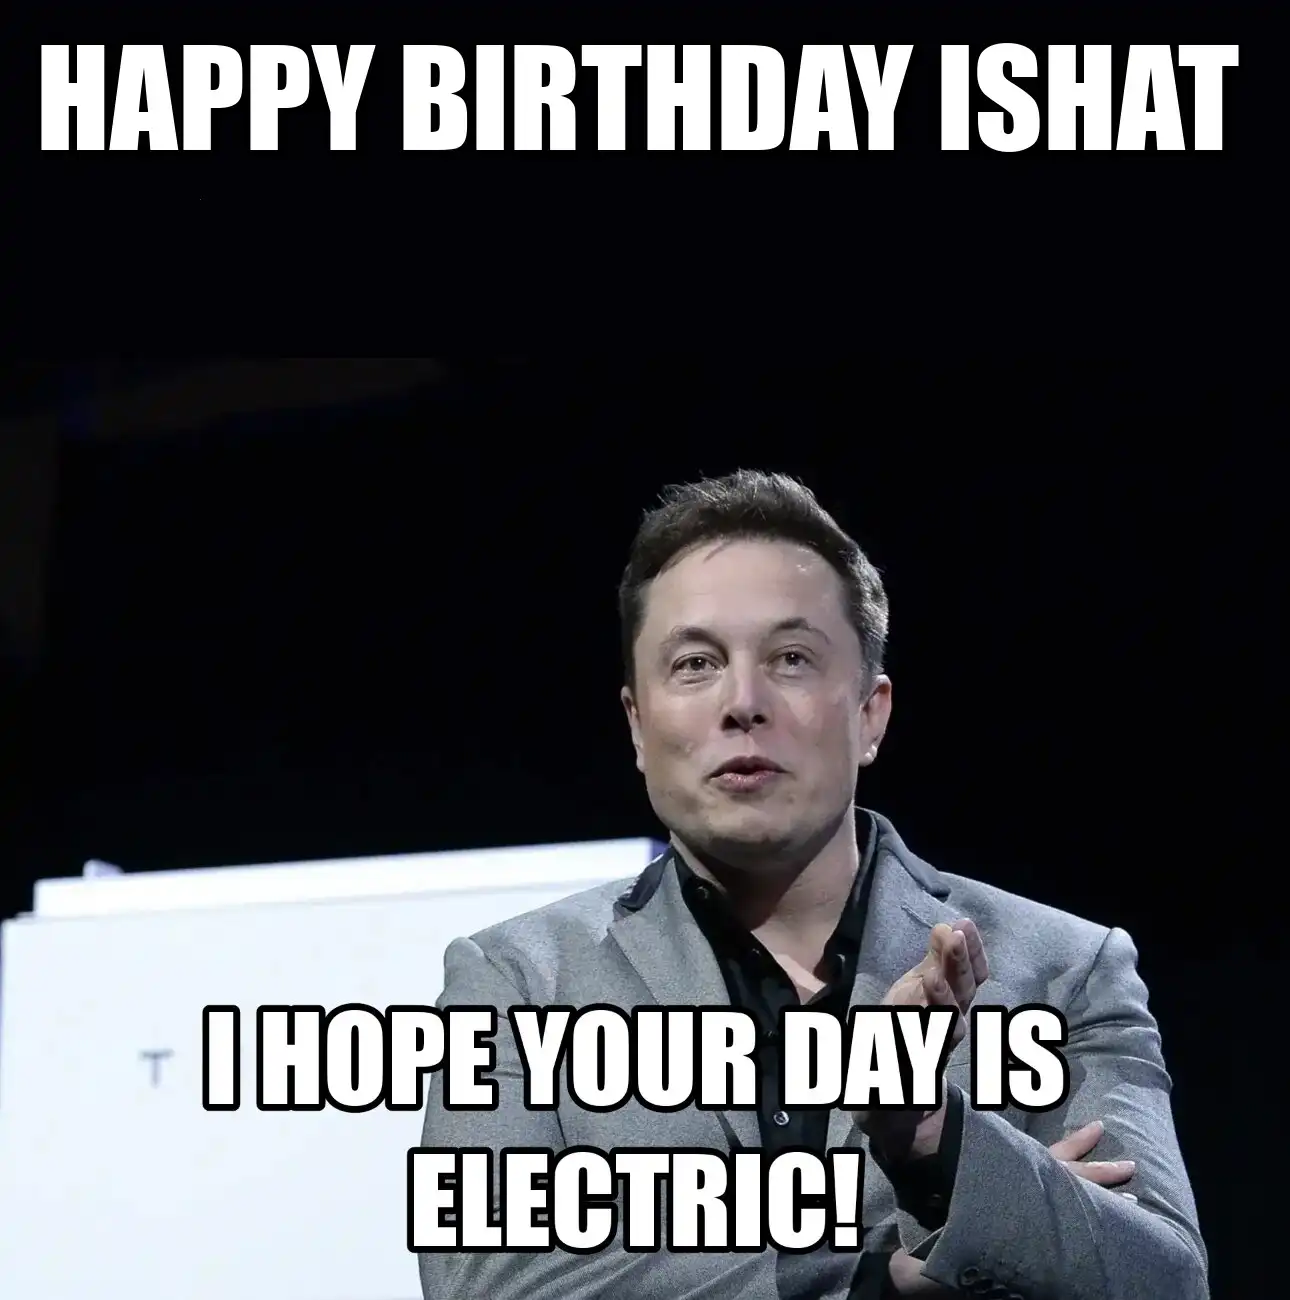 Happy Birthday Ishat I Hope Your Day Is Electric Meme